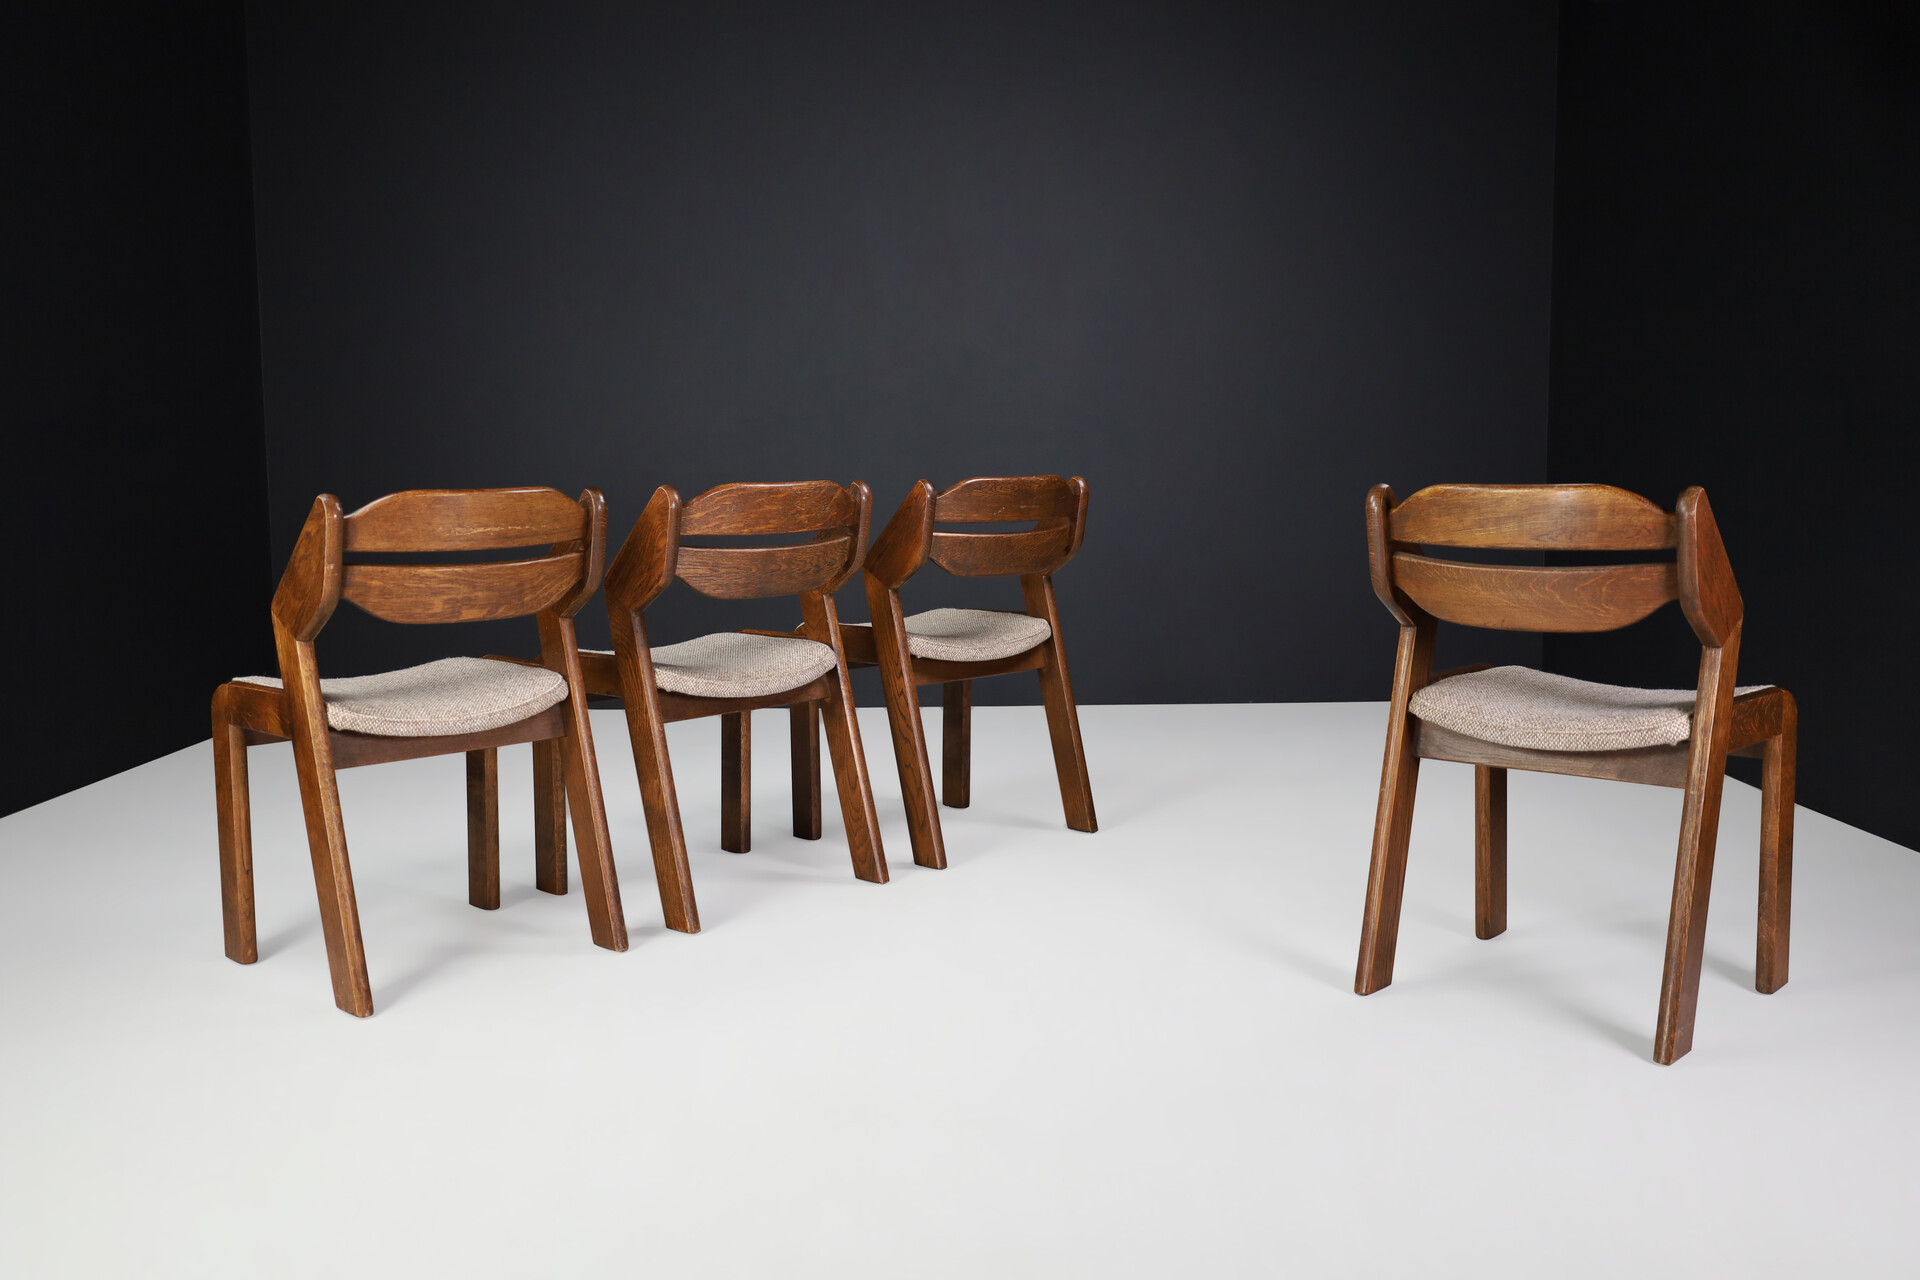 Brutalist Oak Dining room / side chairs, the Netherlands 1960s Mid-20th century